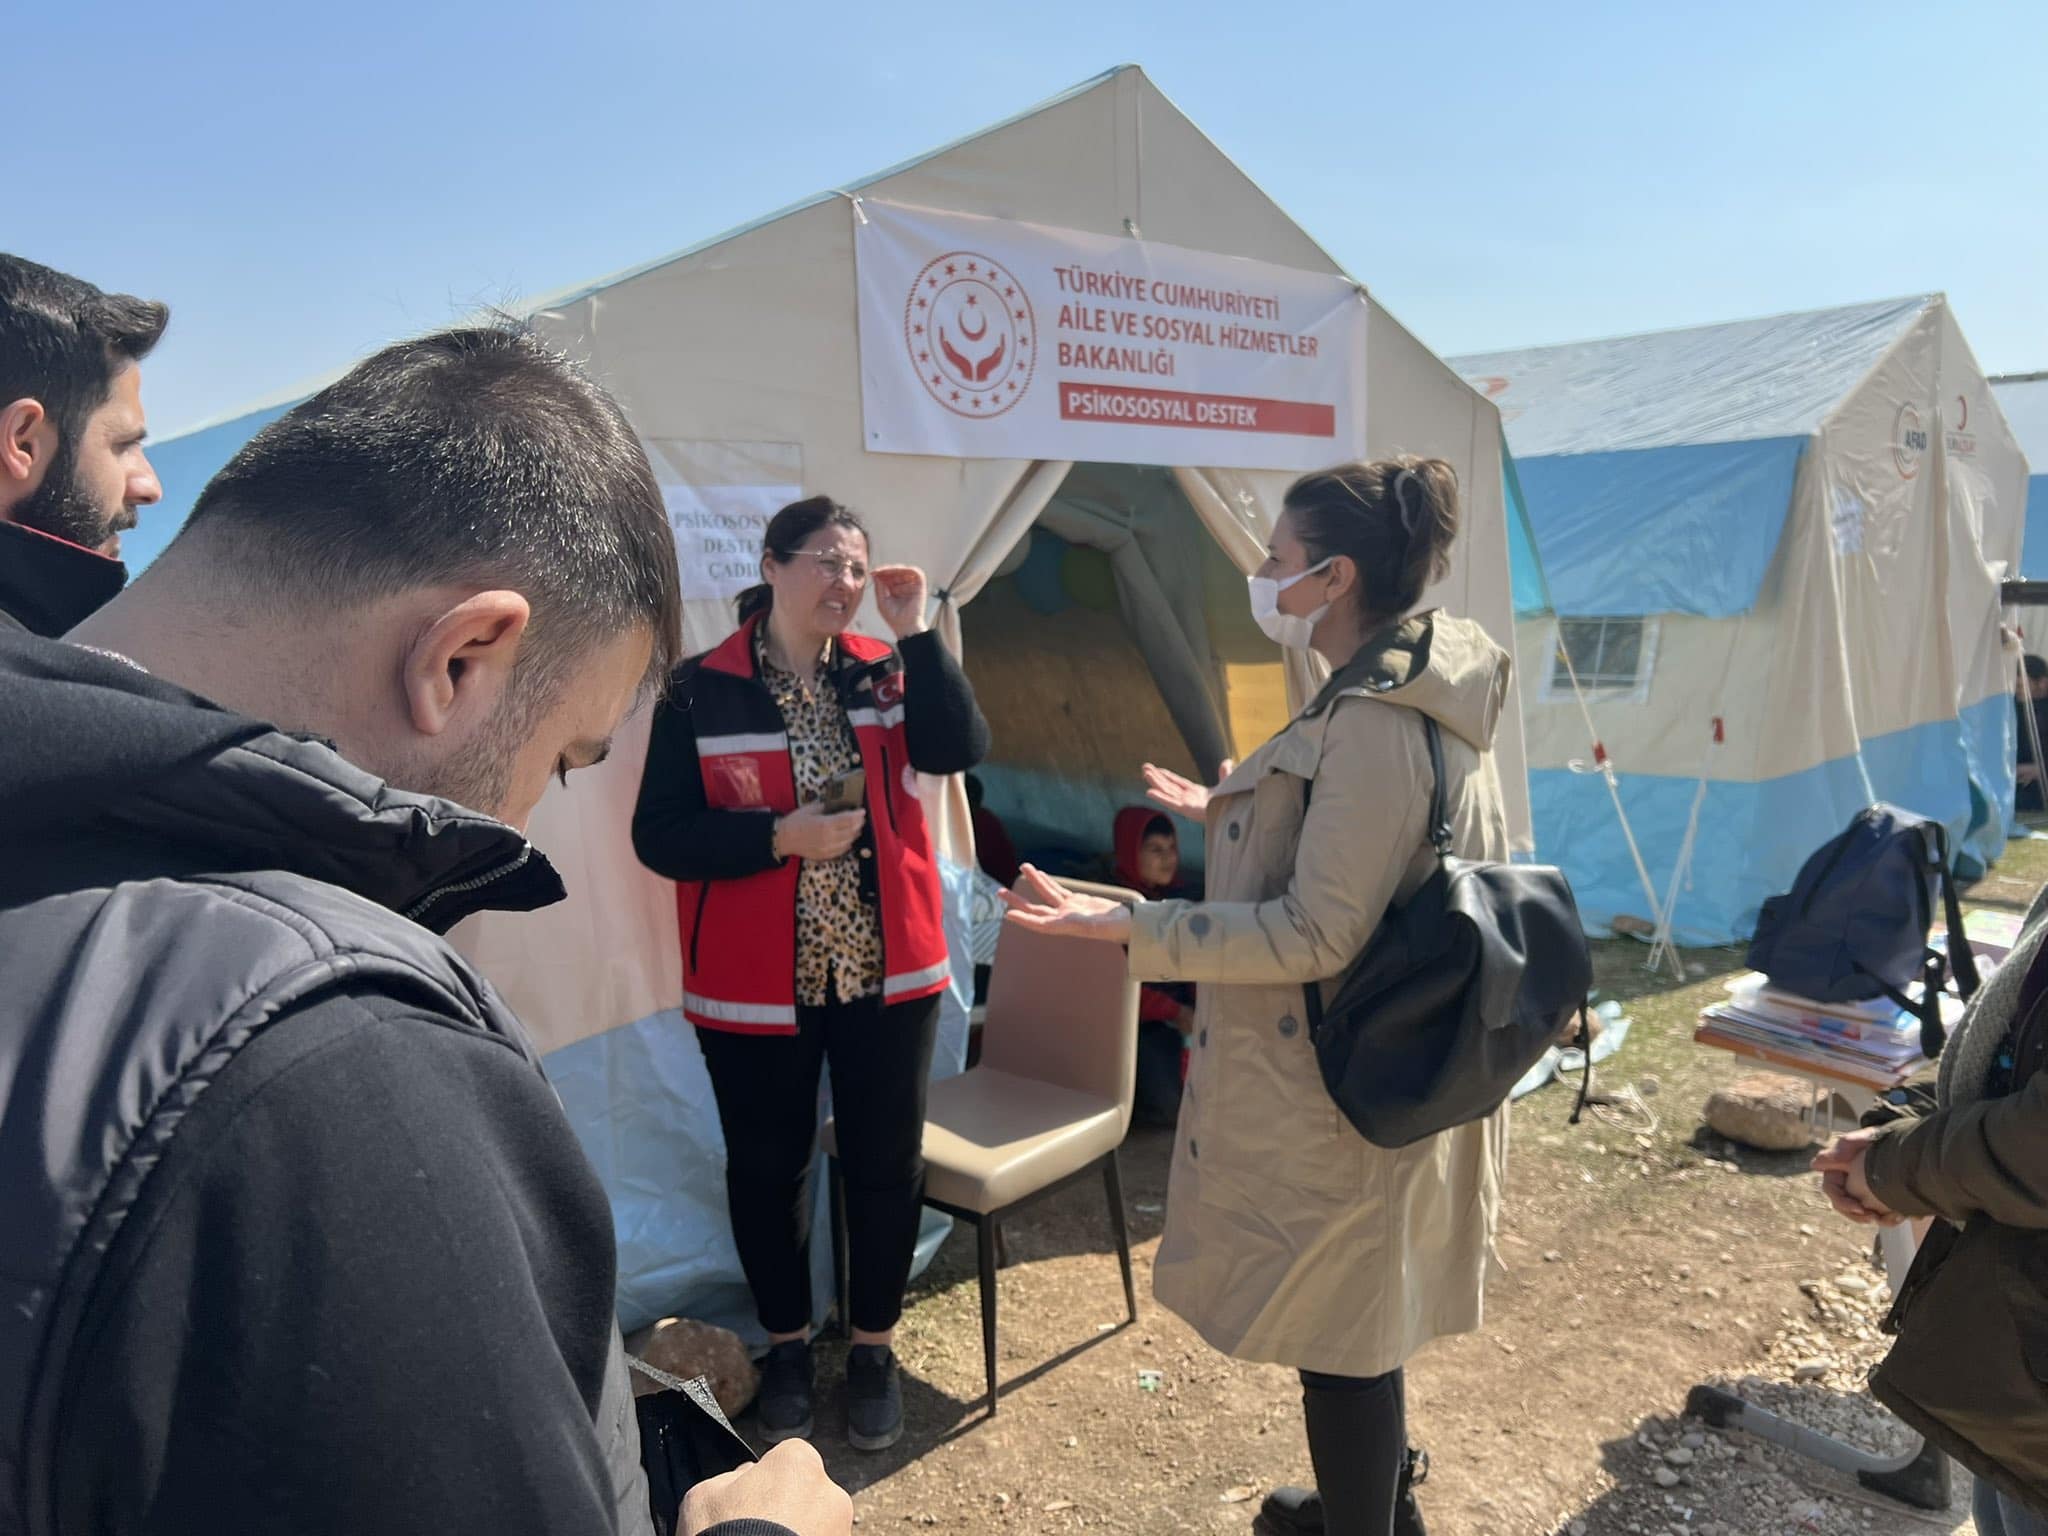 Two woman and two men stand outside a relief tent in conversation